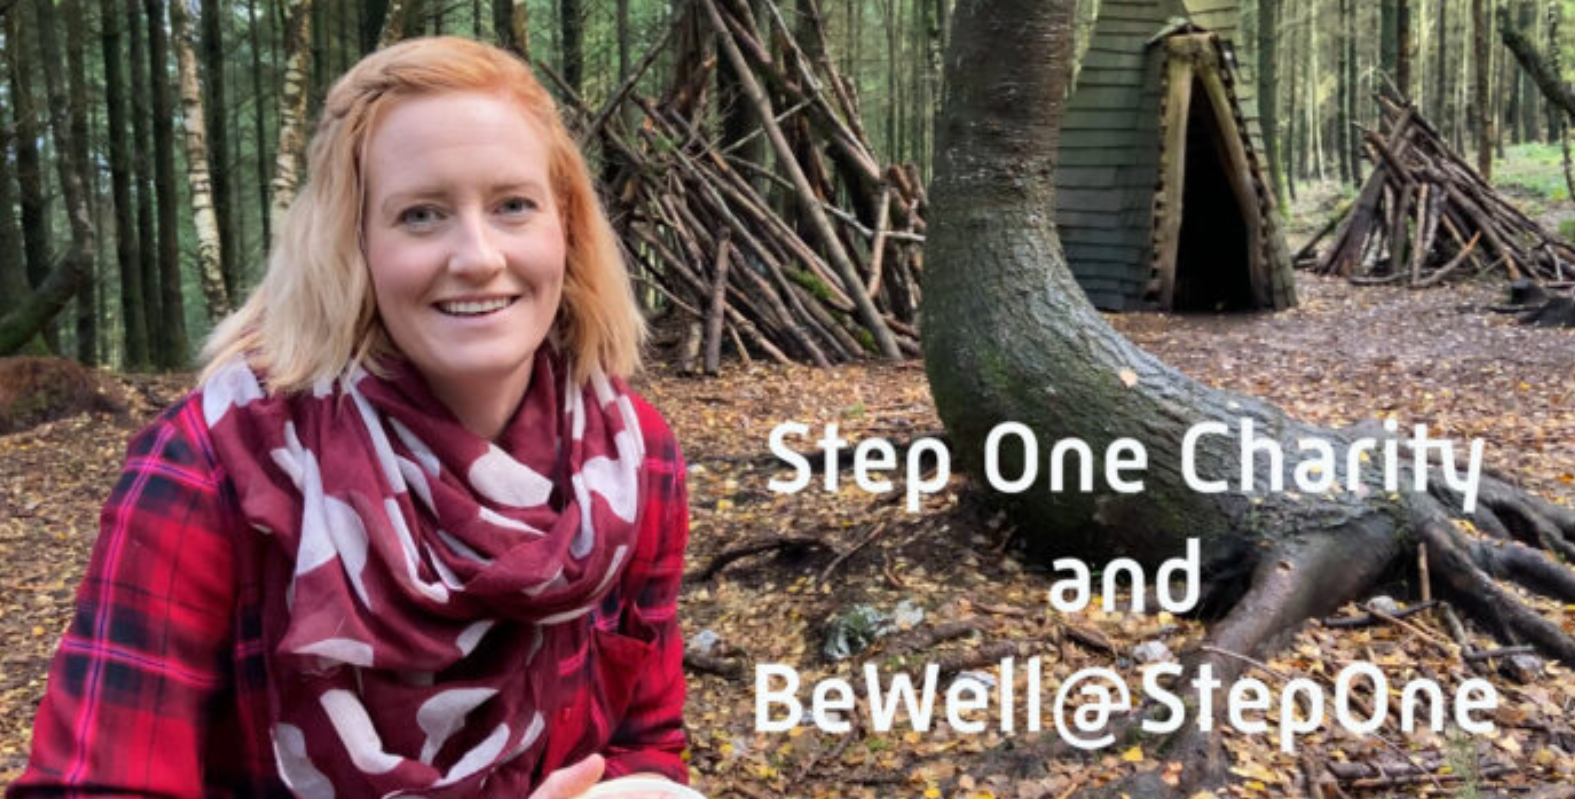 Amy Erith, BeWell@StepOne Training Manager, discusses Step One Charity and BeWell@StepOne initiative.